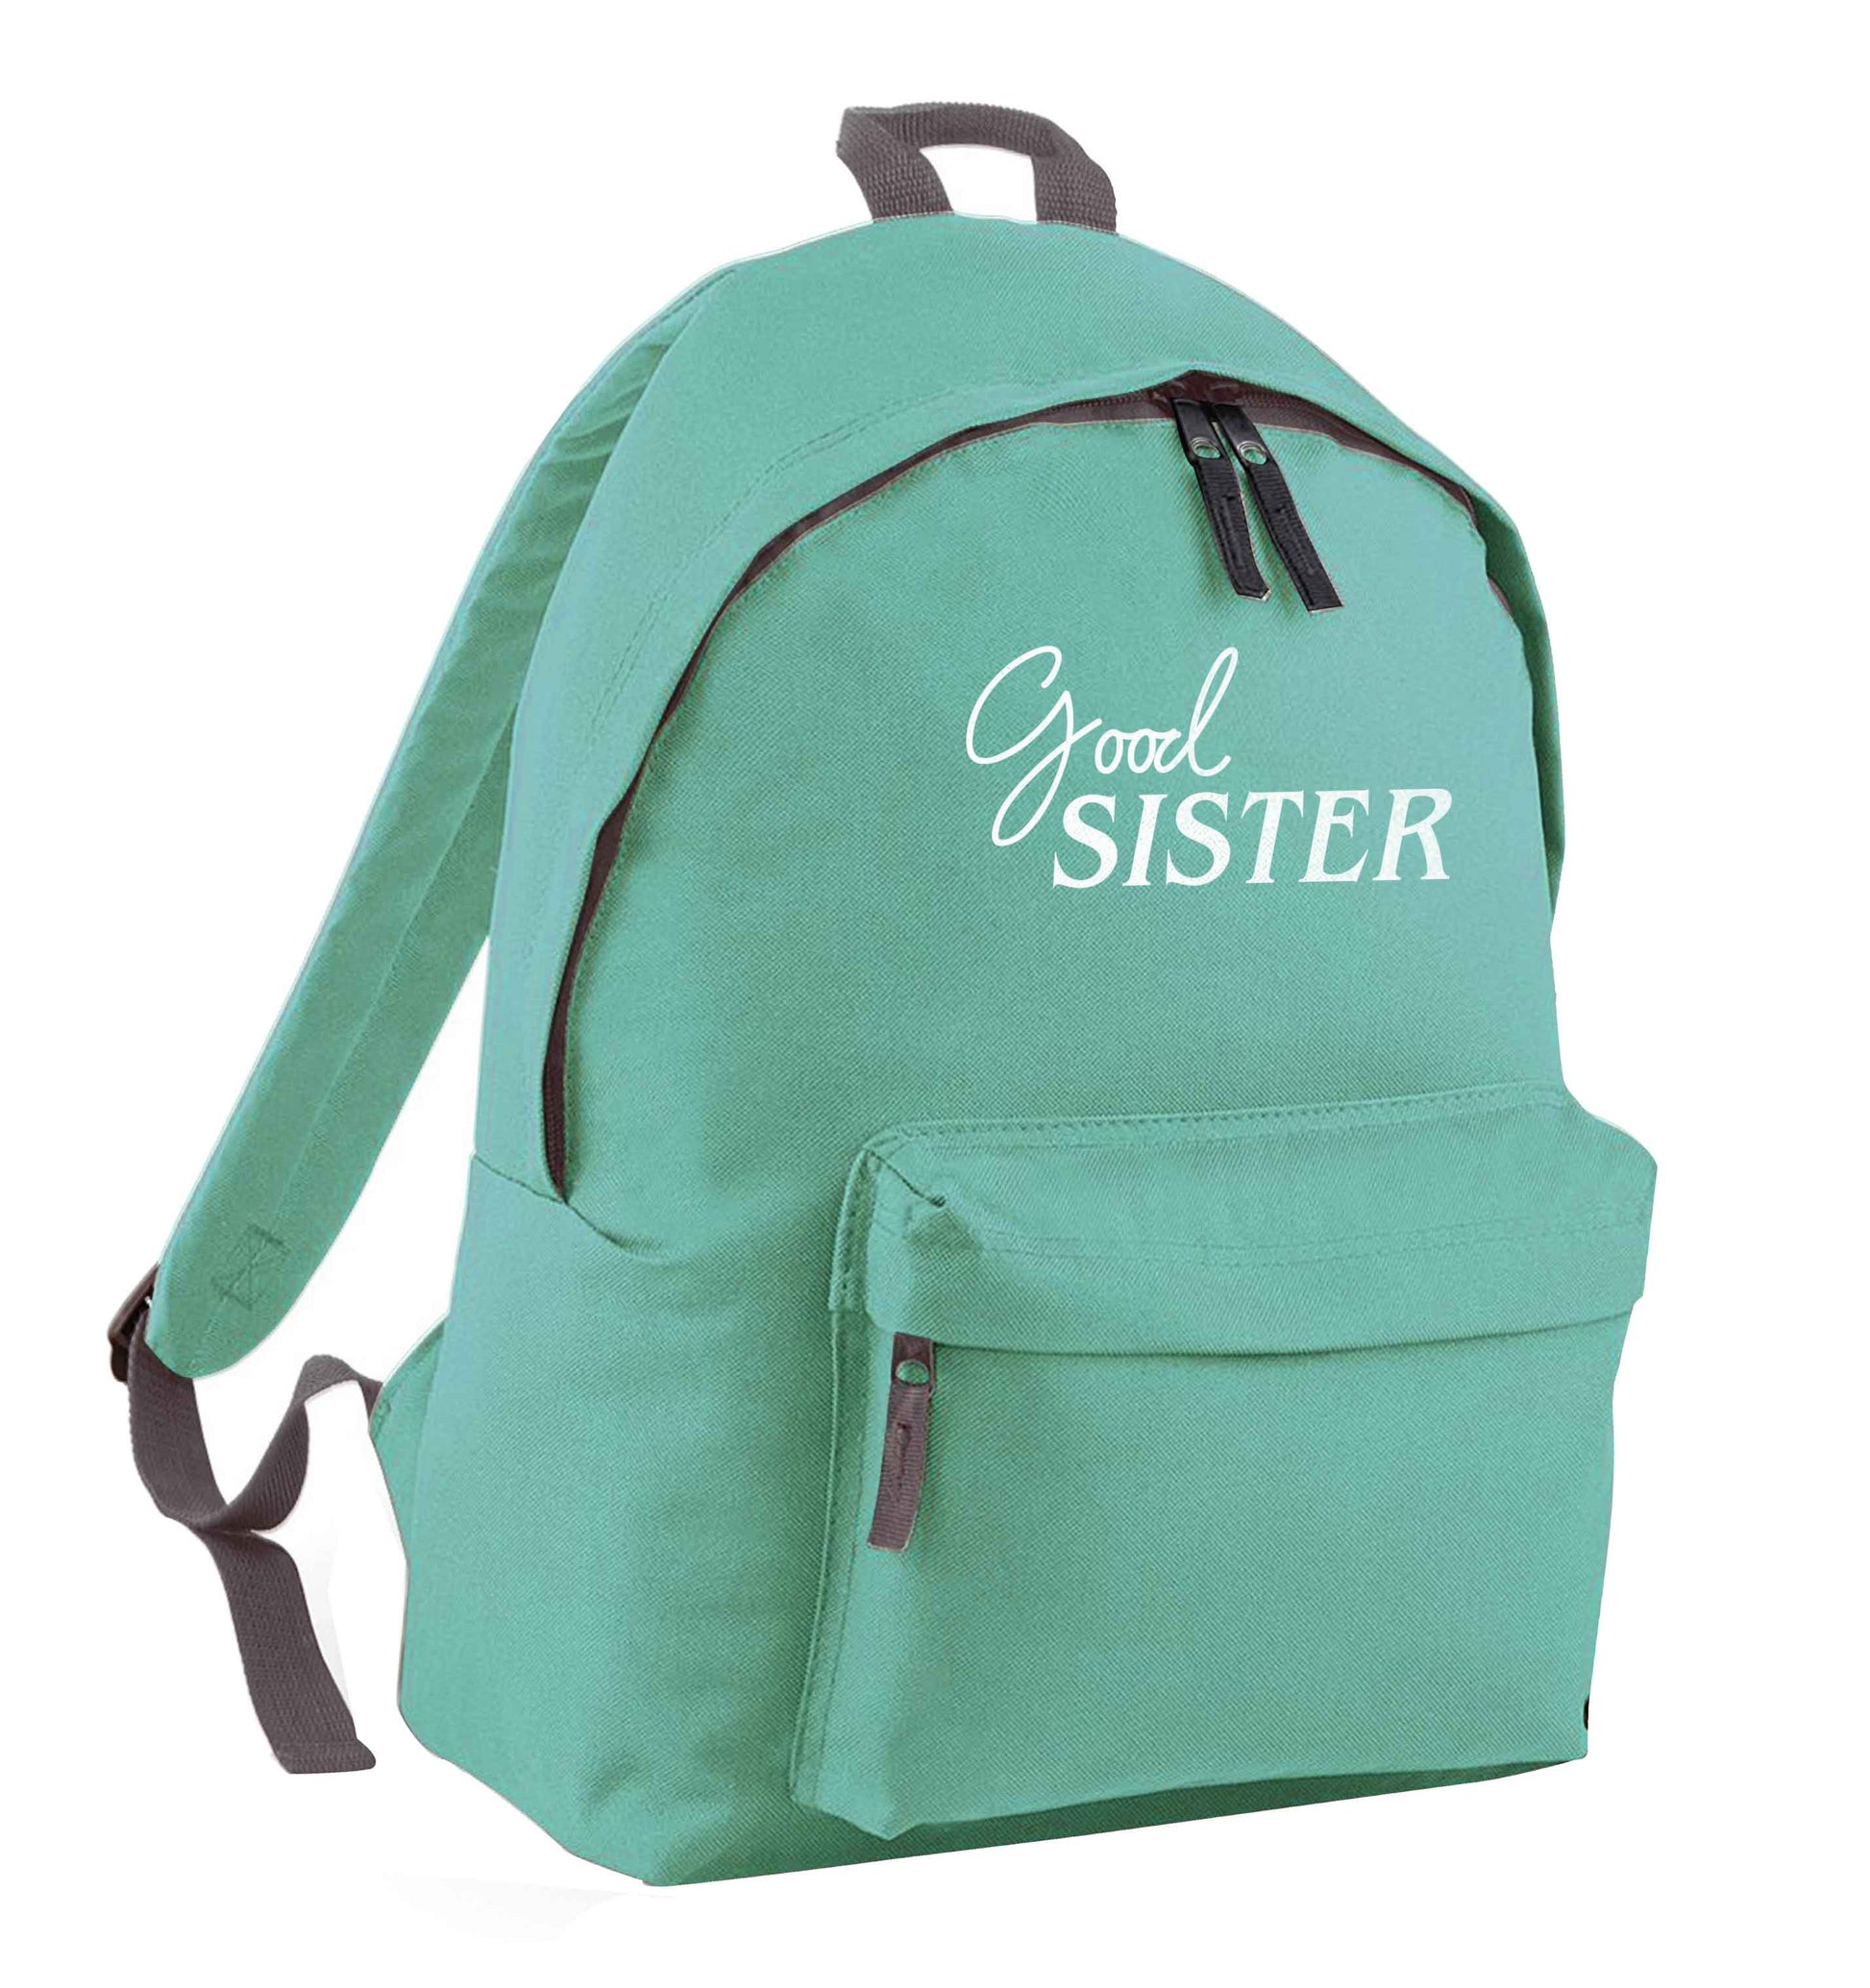 Good sister mint adults backpack